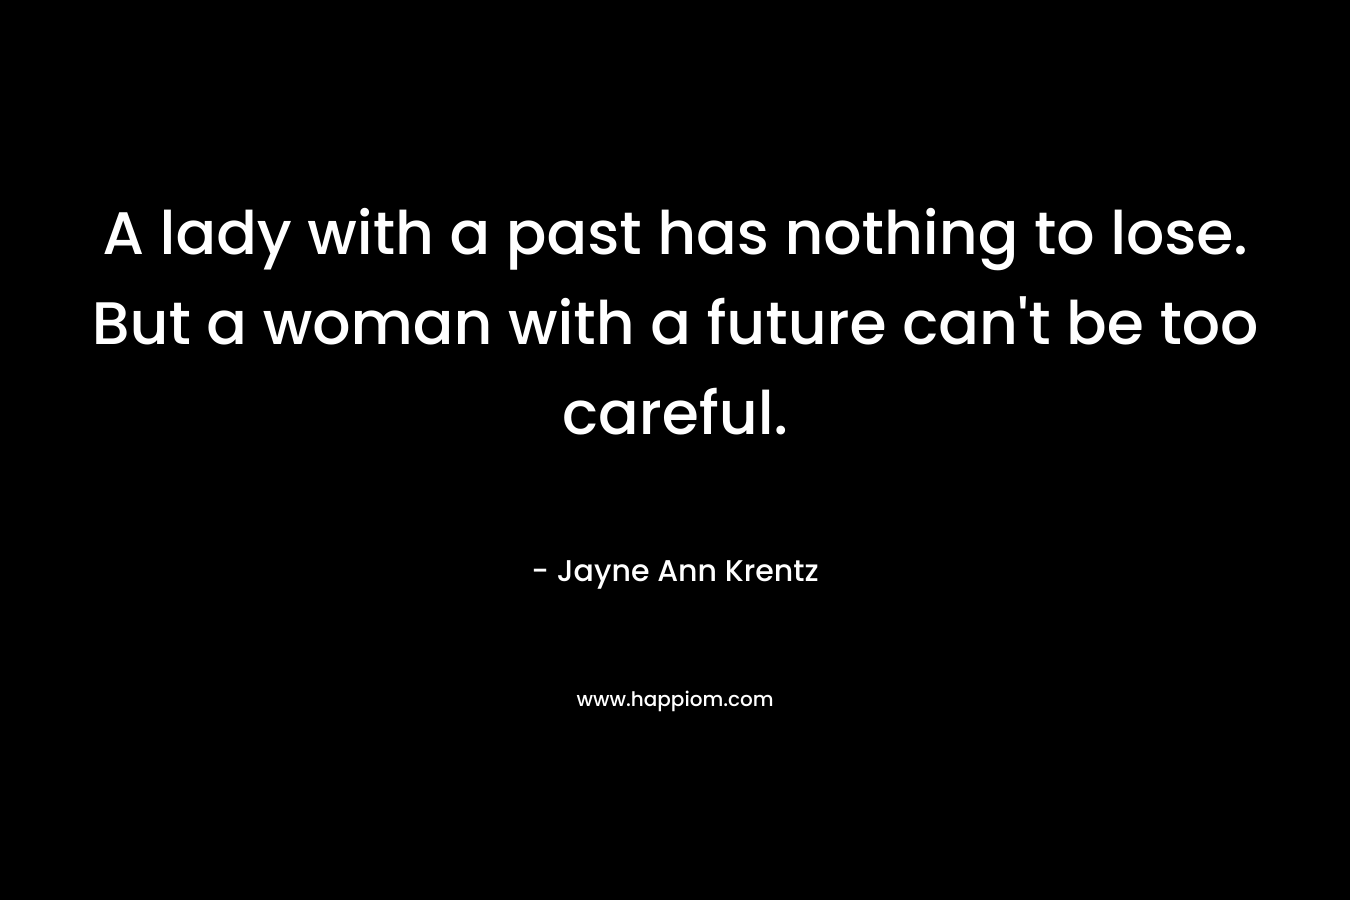 A lady with a past has nothing to lose. But a woman with a future can't be too careful.